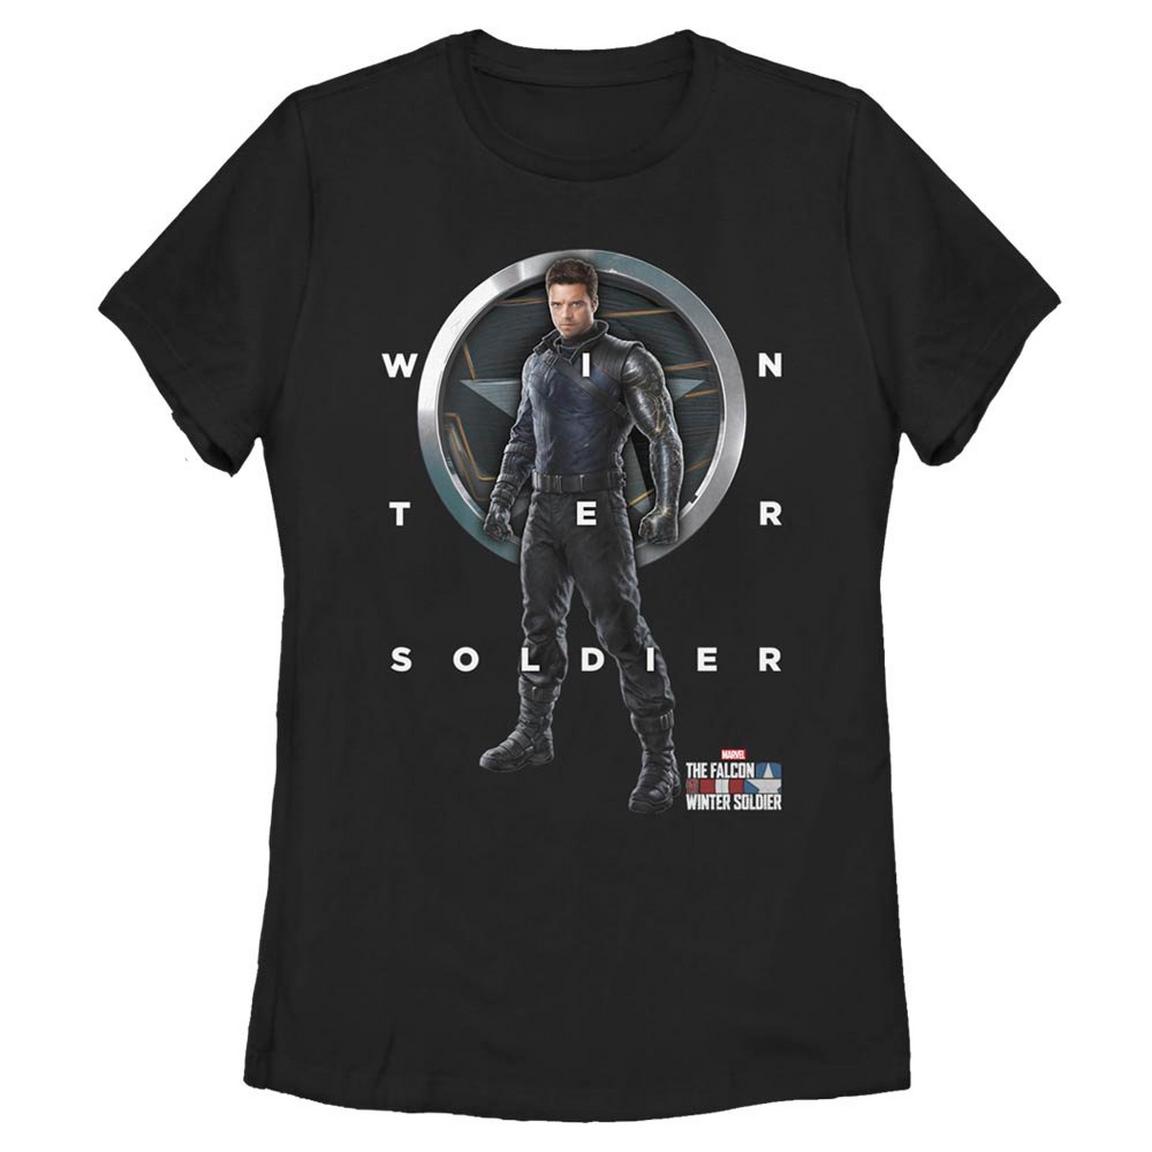 Marvel The Falcon and the Winter Soldier Bucky Poster Women's T-Shirt, Fifth Sun -  MLFW0007-70001004